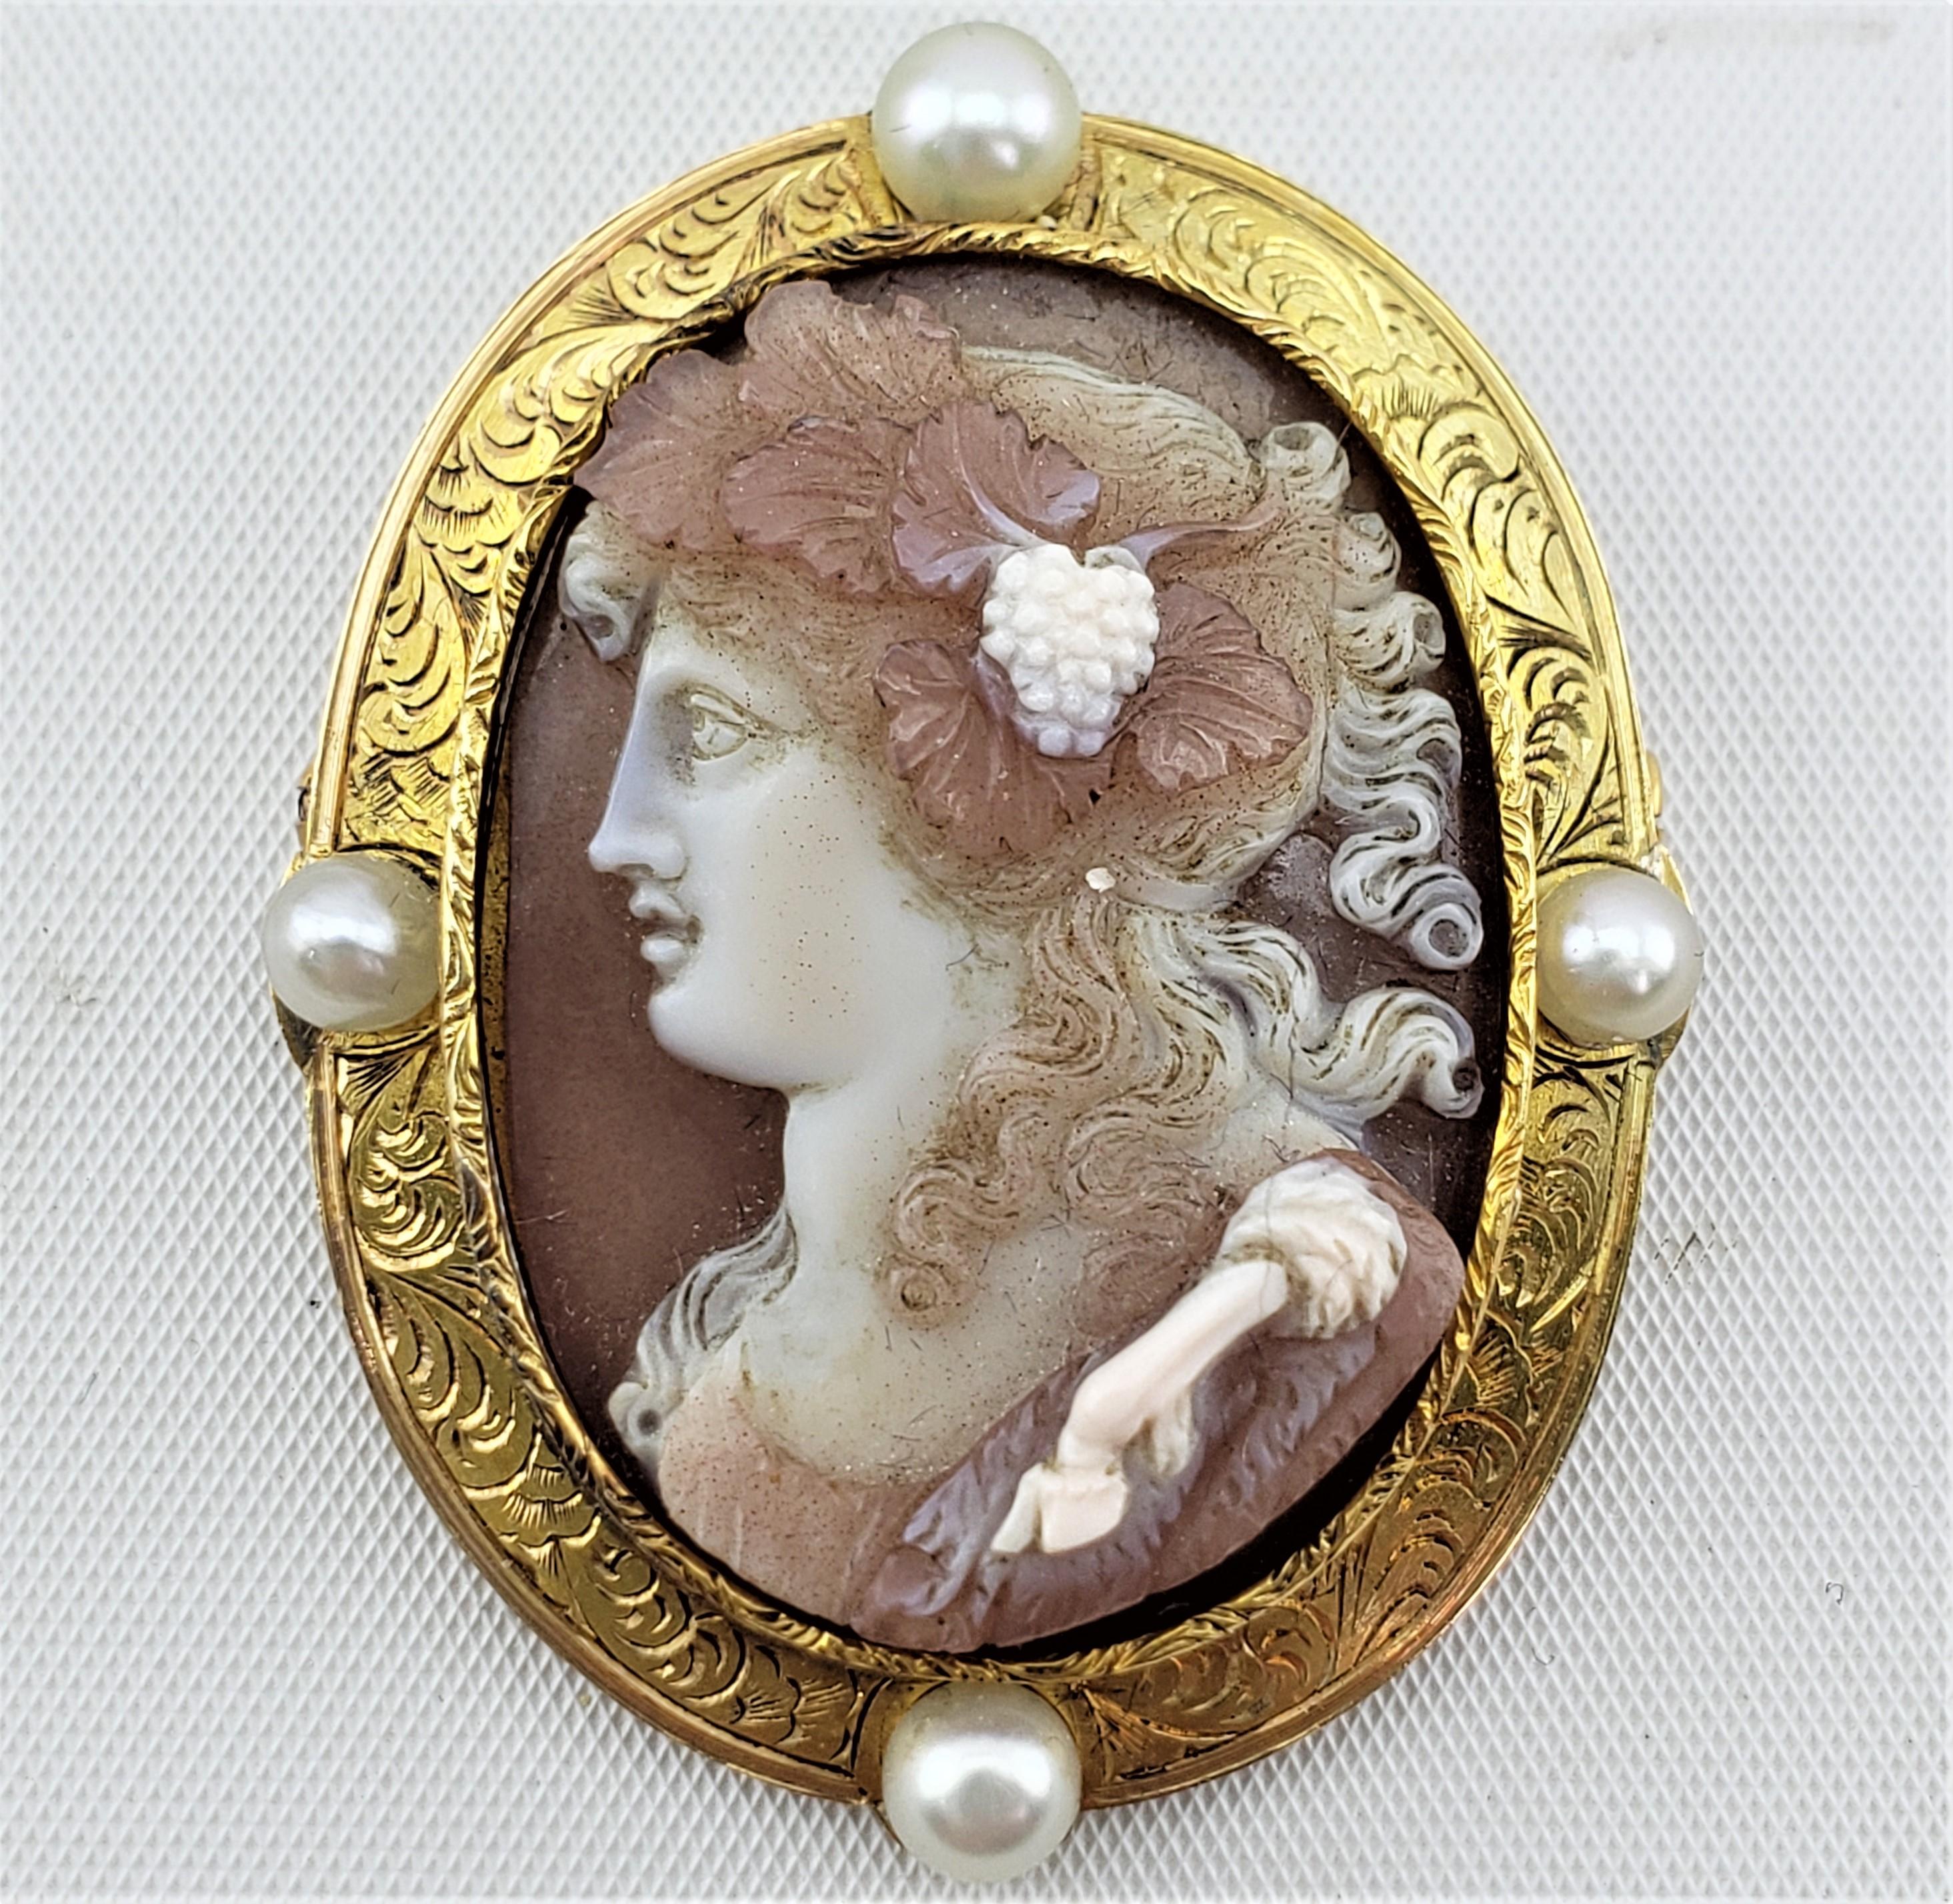 This antique brooch is unsigned, or marked, but presumed to have originated from Italy and date to approximately 1850 and done in a period Renaissance Revival style. The bezel is unmarked, but acid tests to at minimum 18 karat gold and is engraved